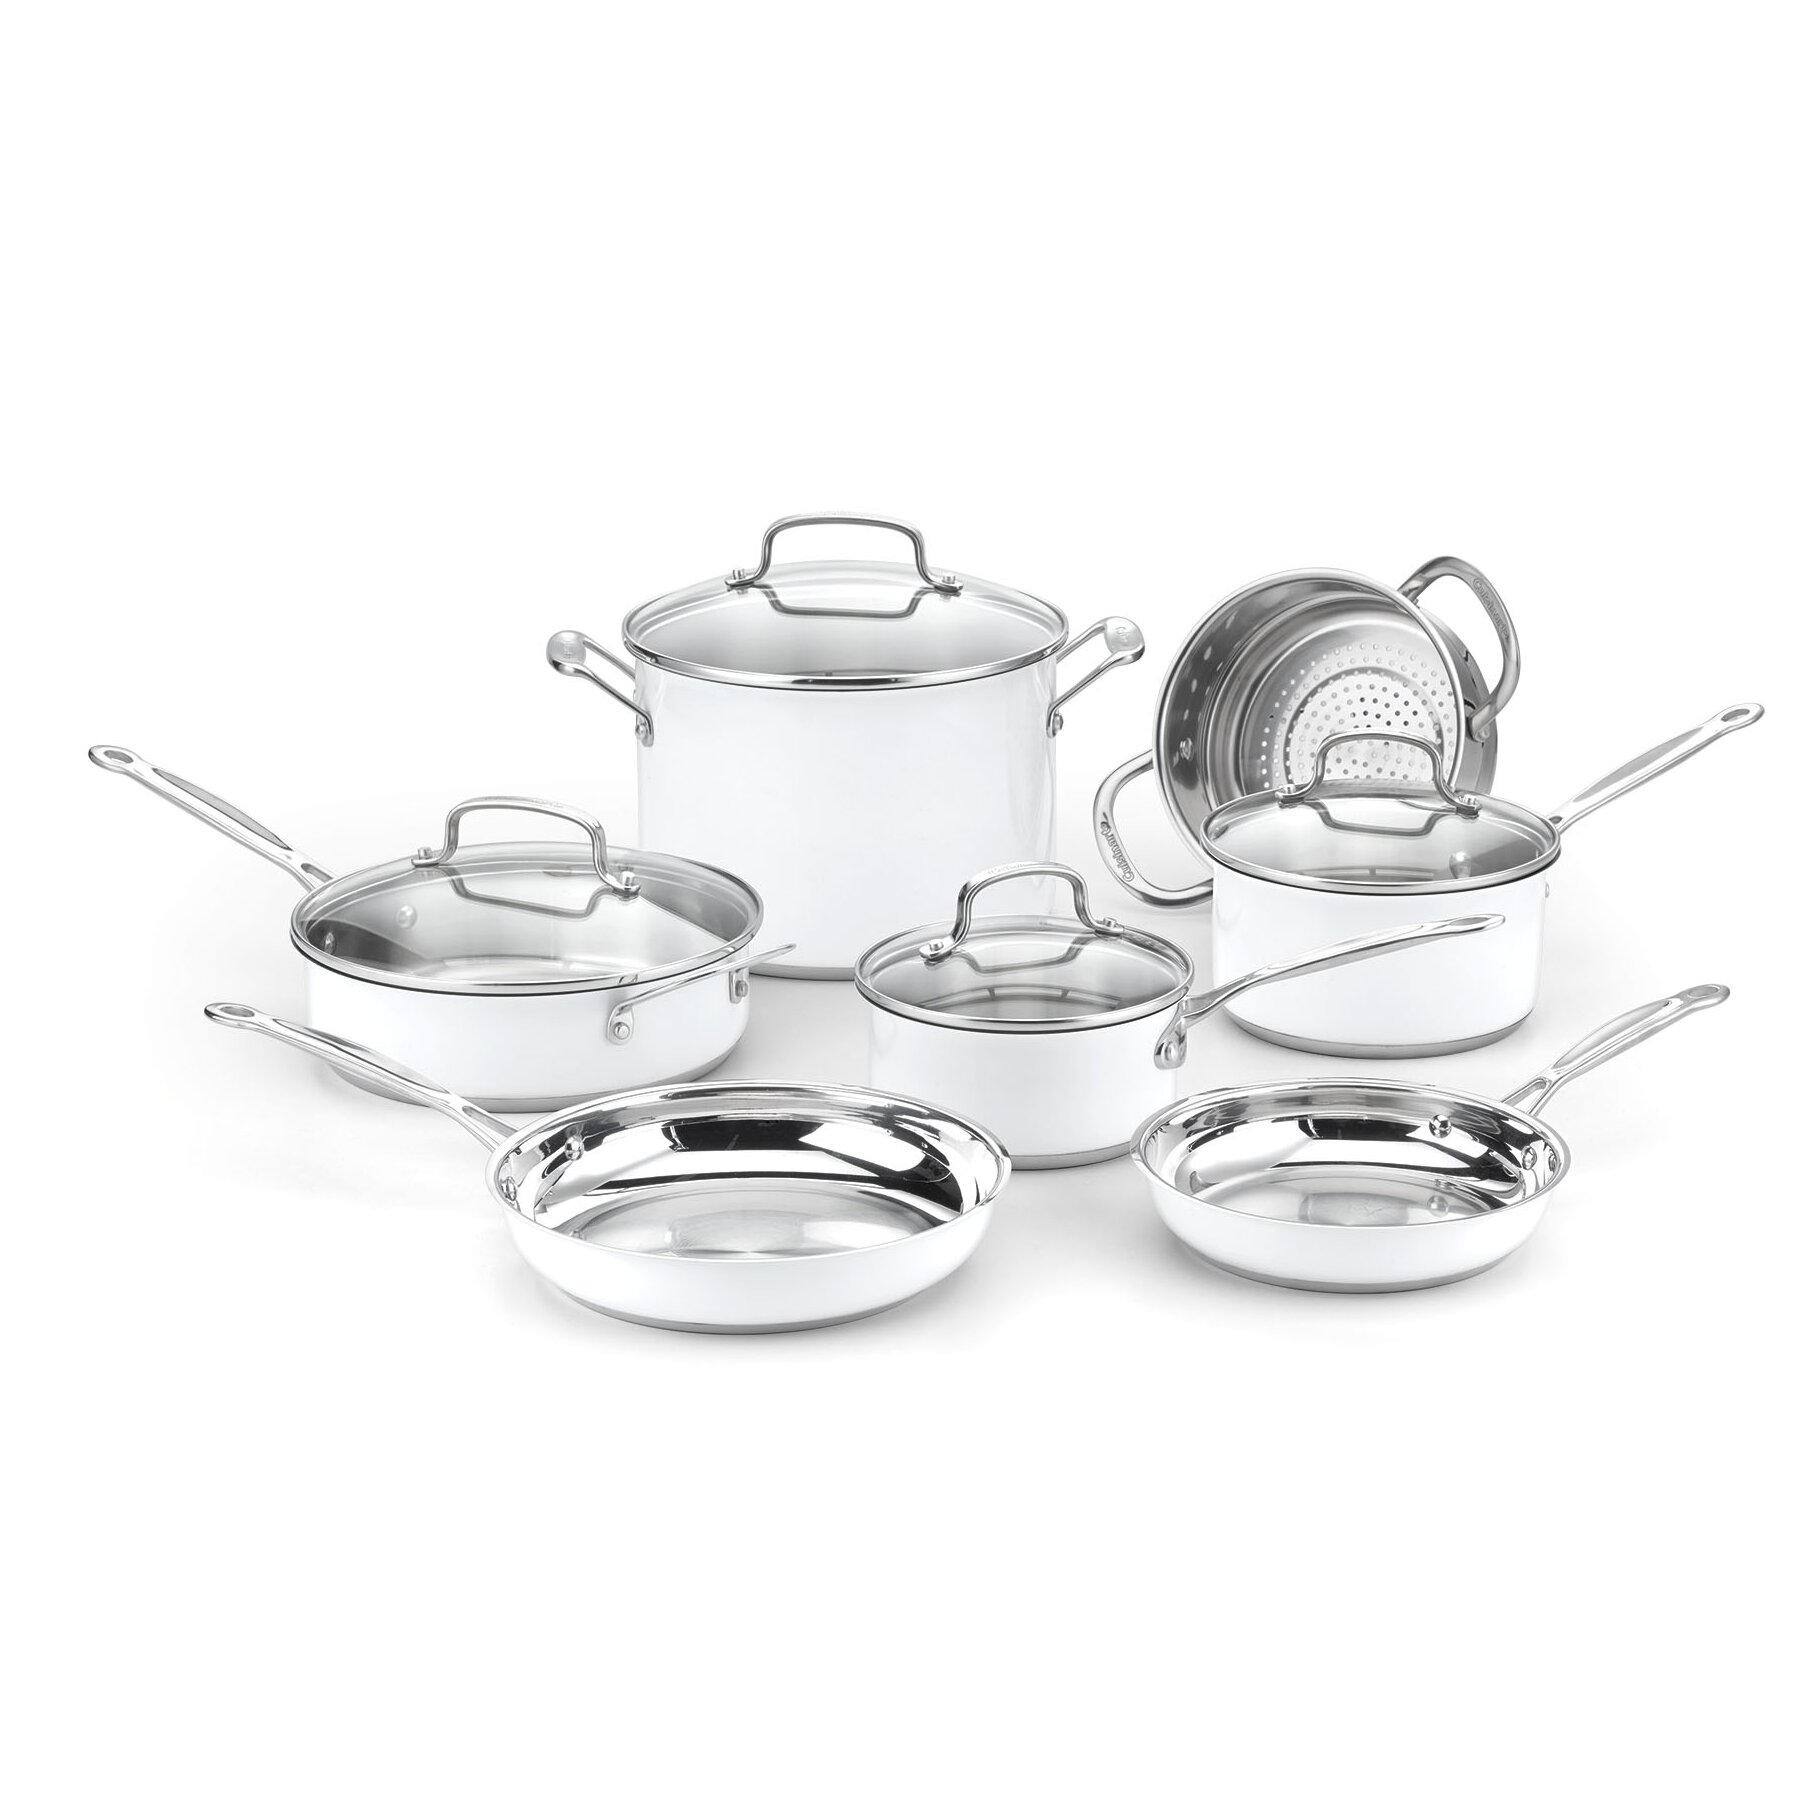 Cuisinart Chef's Classic 11 Piece Stainless Cookware Set | Wayfair Cuisinart Chef's Classic 11 Piece Stainless Steel Cookware Set